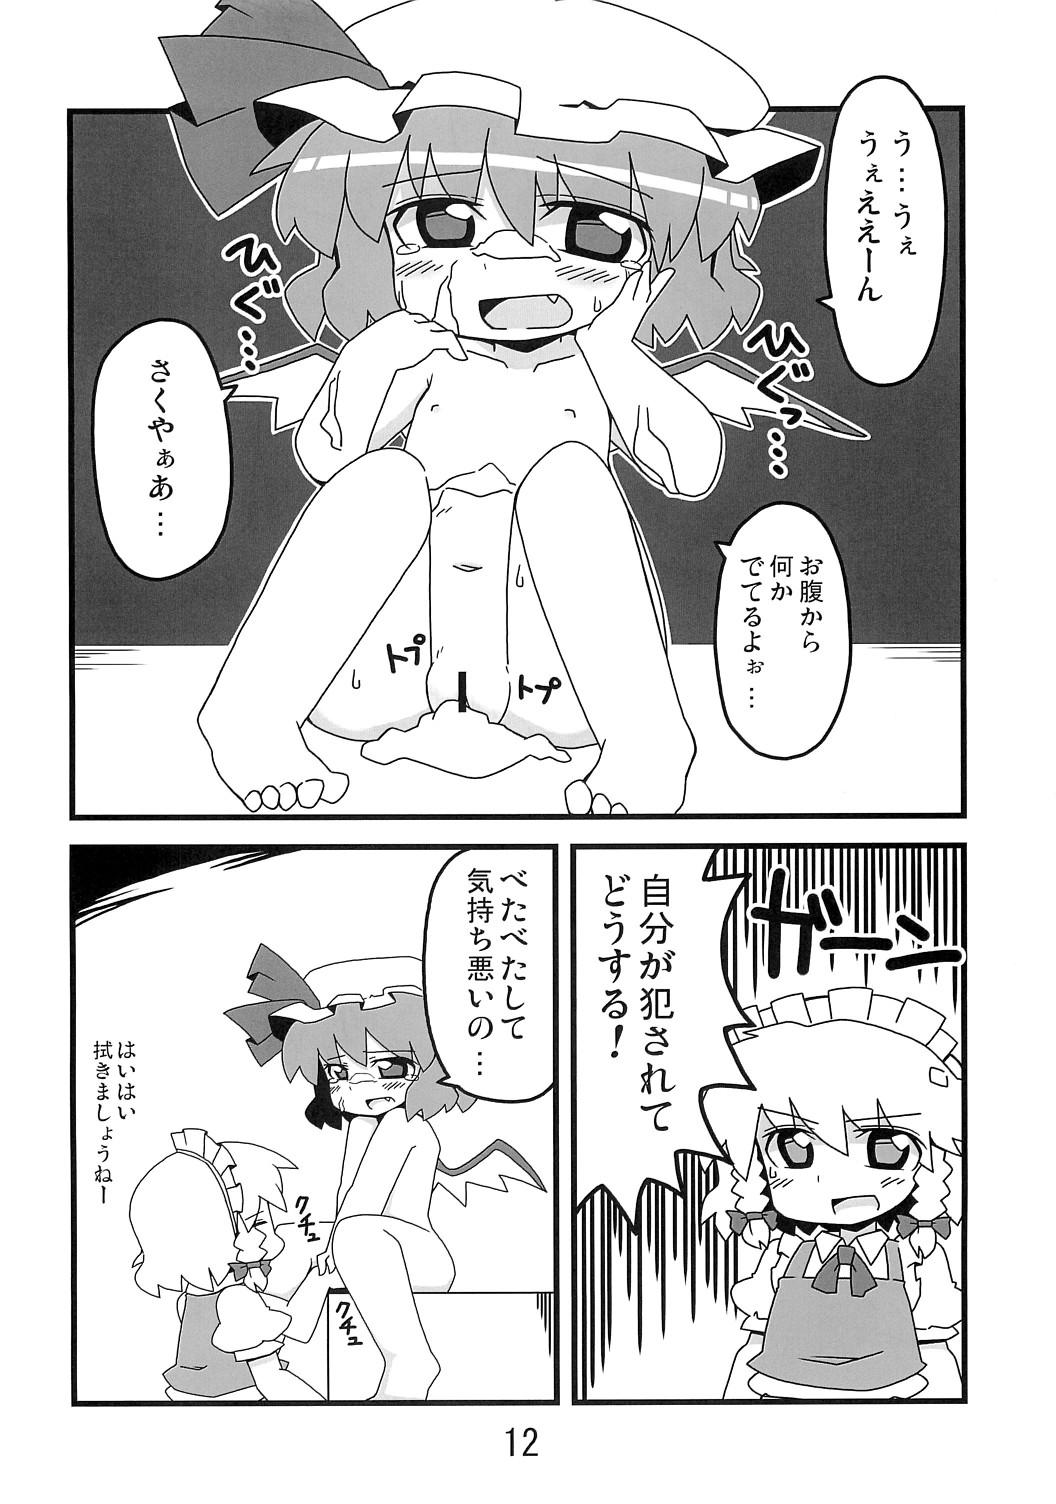 Boy Fuck Girl 東方豊年祭 - Touhou project Spank - Page 11